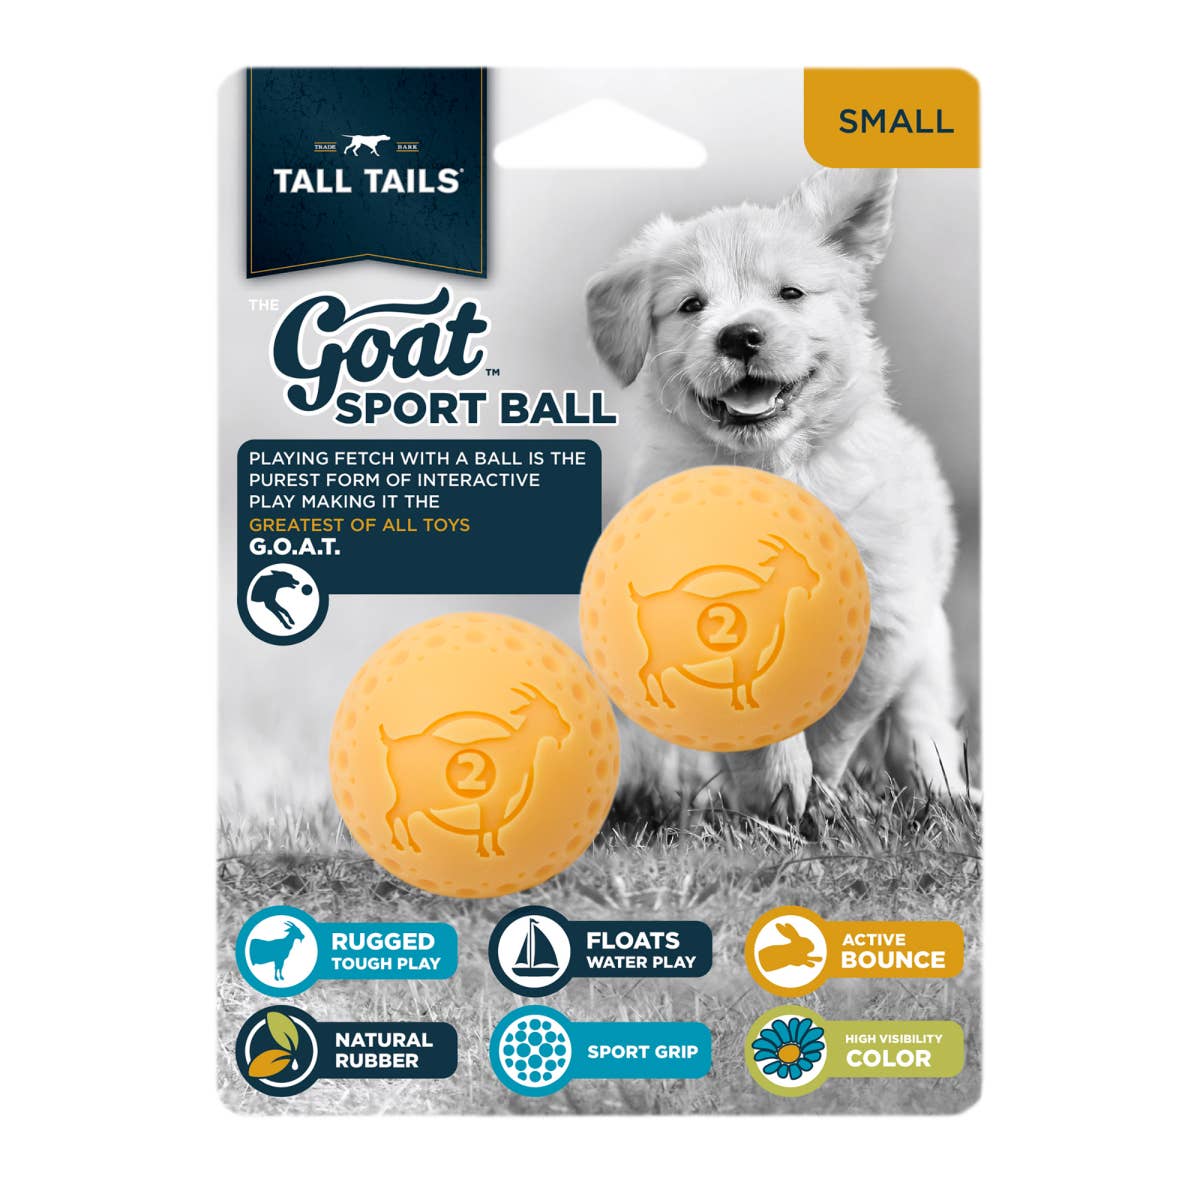 Tall Tails GOAT Sport Balls, 2-Pack- Small